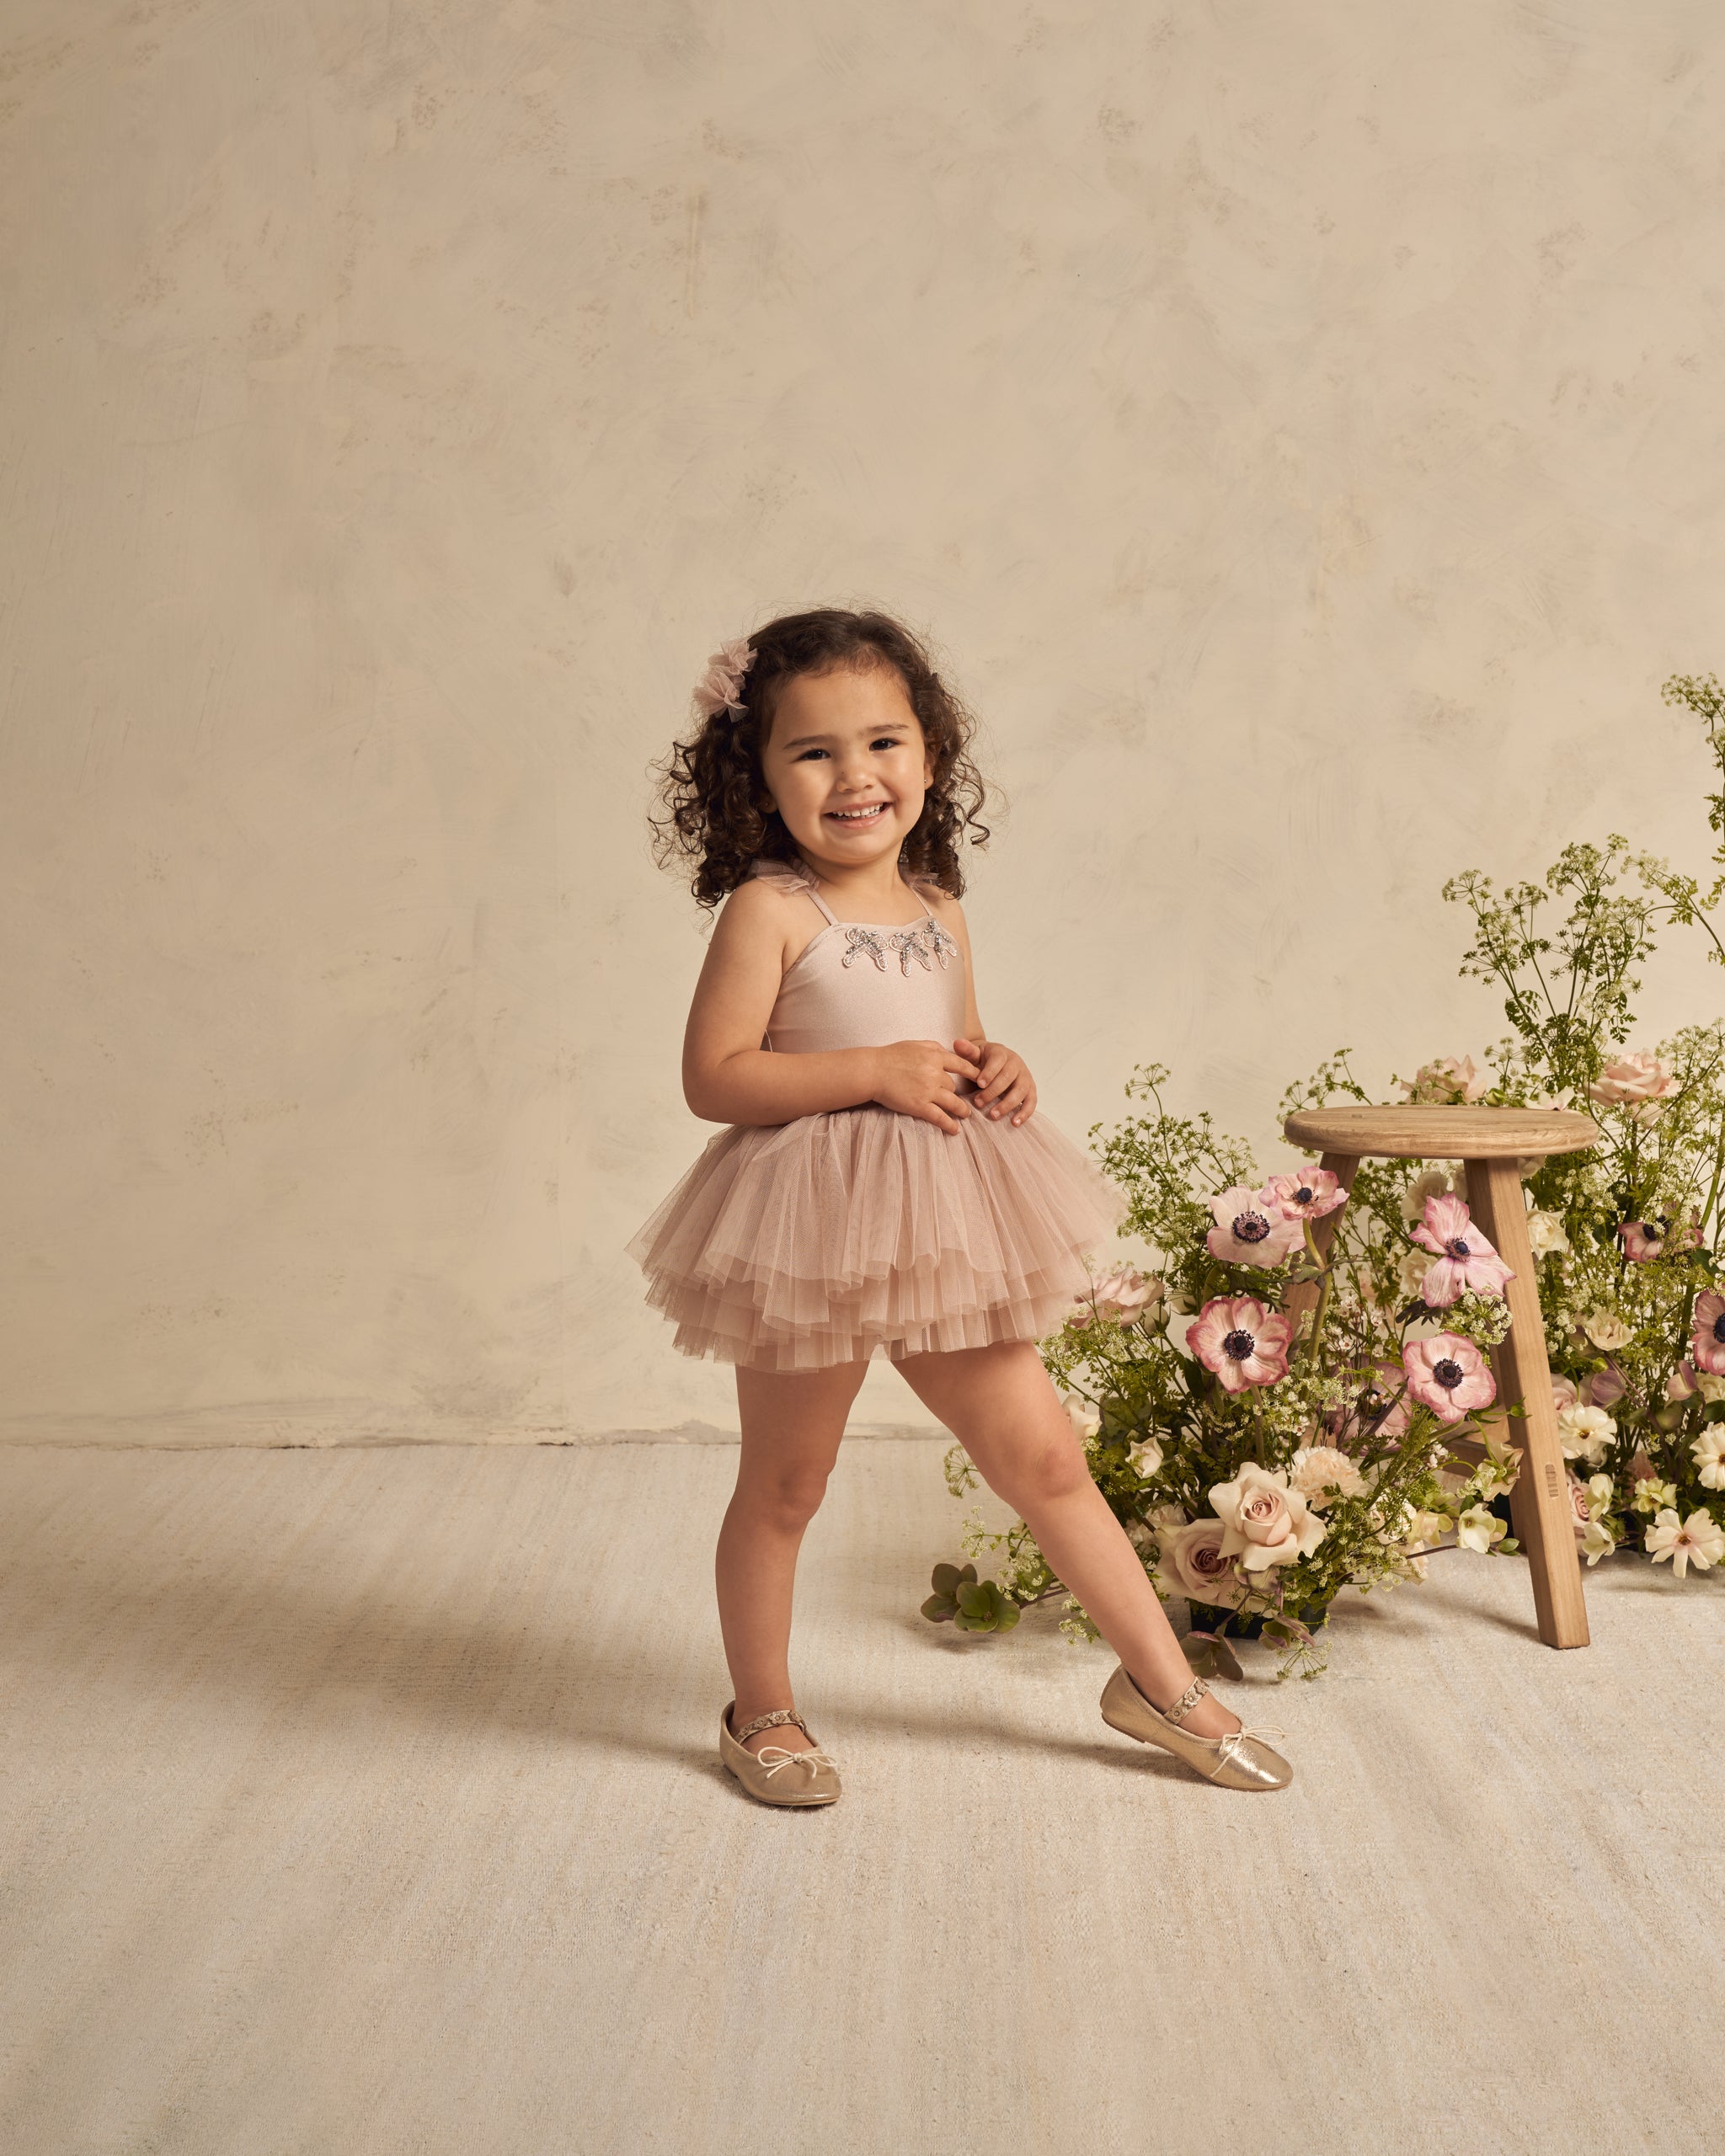 Clementine Tutu || Rose - Rylee + Cru | Kids Clothes | Trendy Baby Clothes | Modern Infant Outfits |